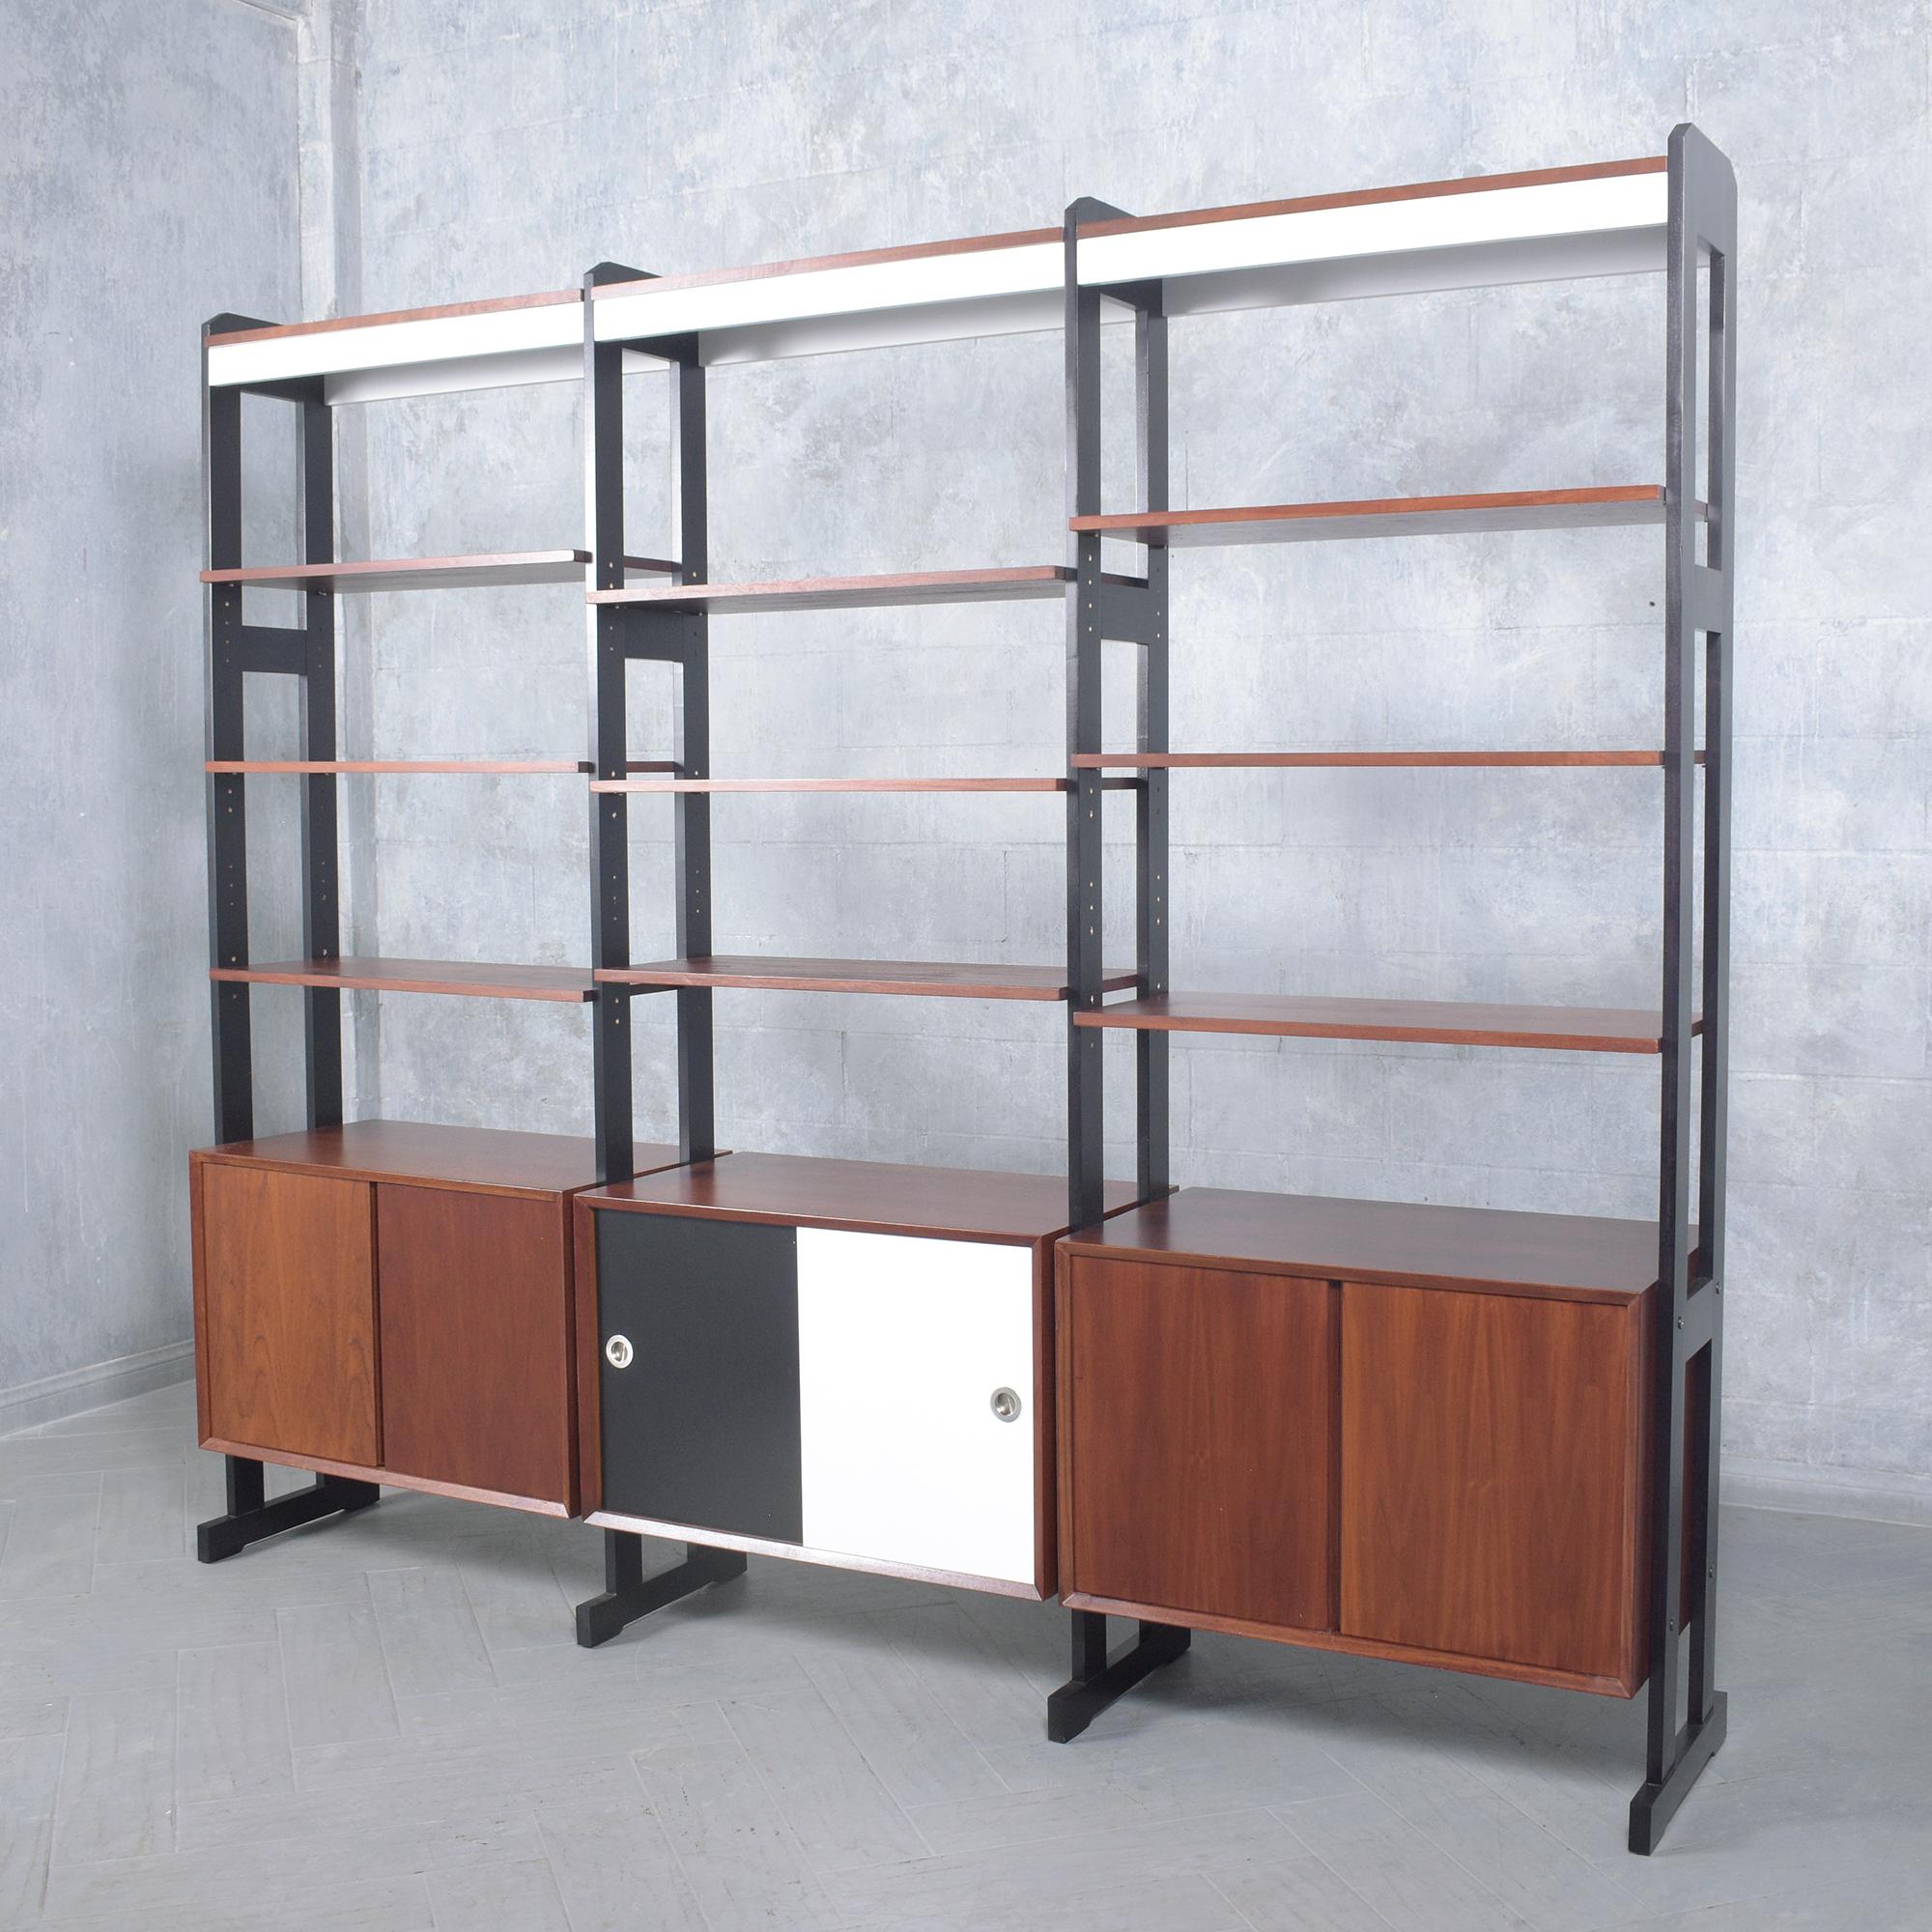 Unveil the enduring allure of our vintage mid-century modern bookshelf, impeccably restored to its original splendor. Crafted in the 1960s from premium teak, this bookshelf stands out with its striking color combination of walnut, white, and black,